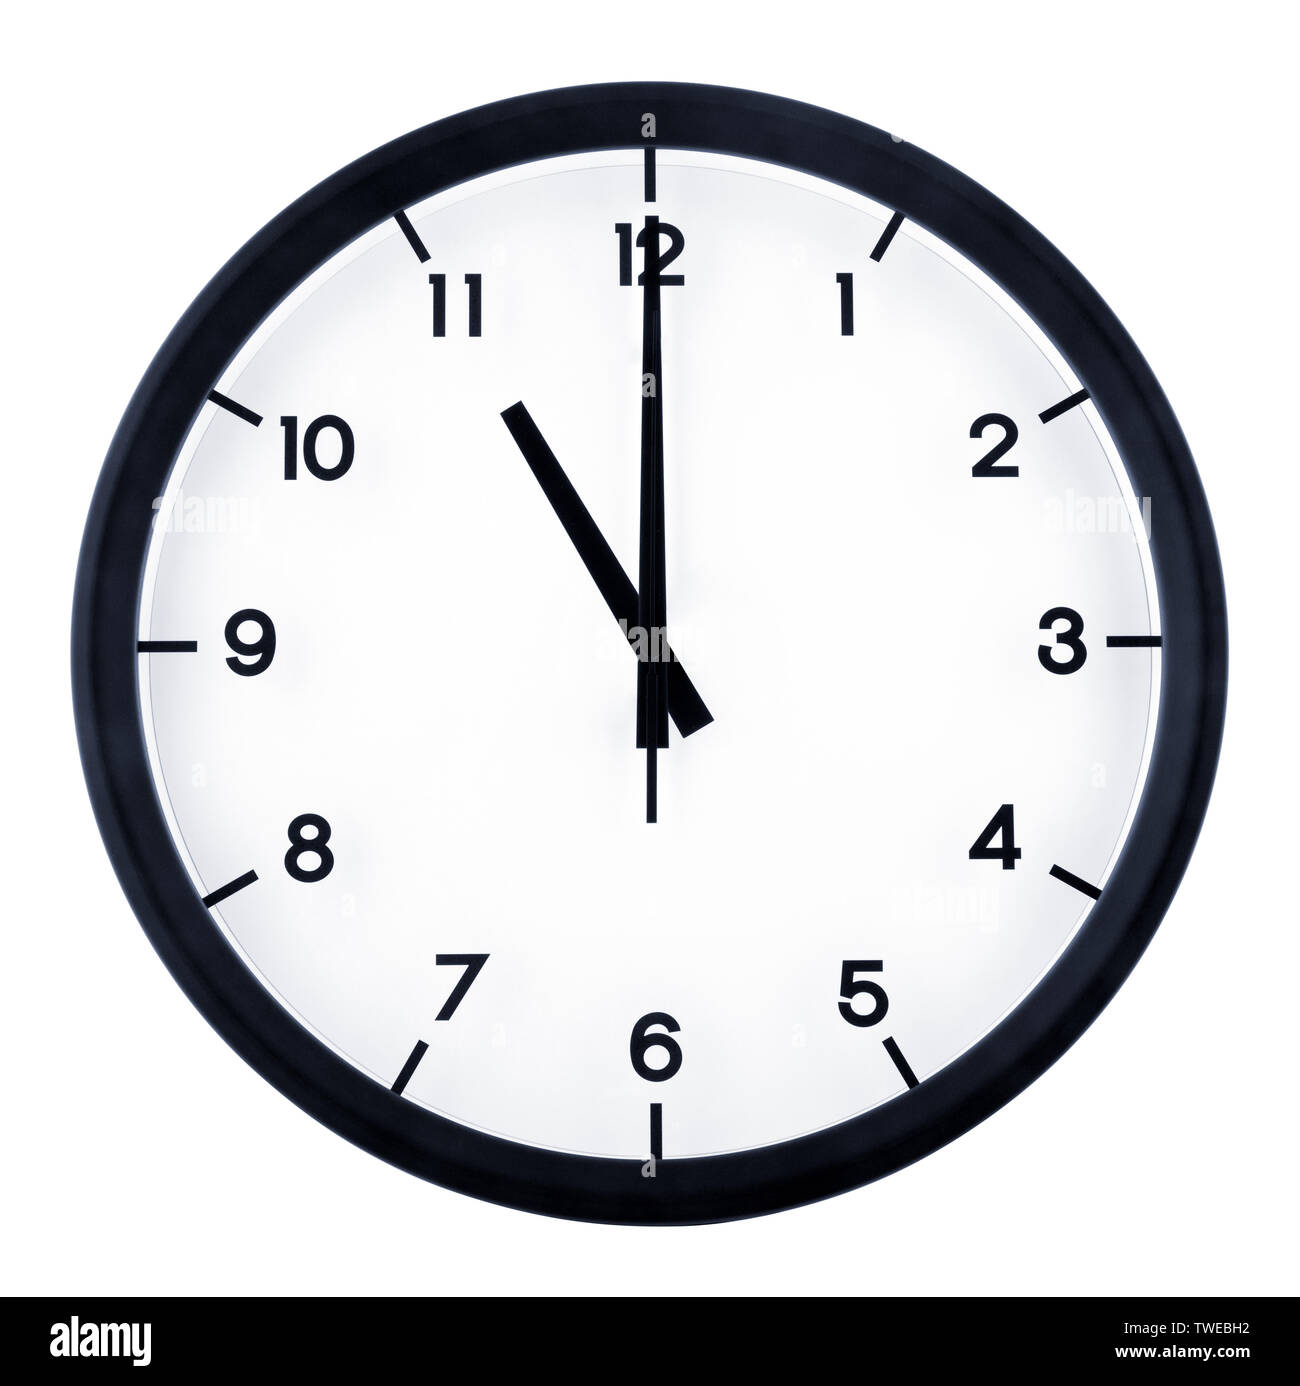 Classic analog clock pointing at 11 o'clock, isolated on white background Stock Photo